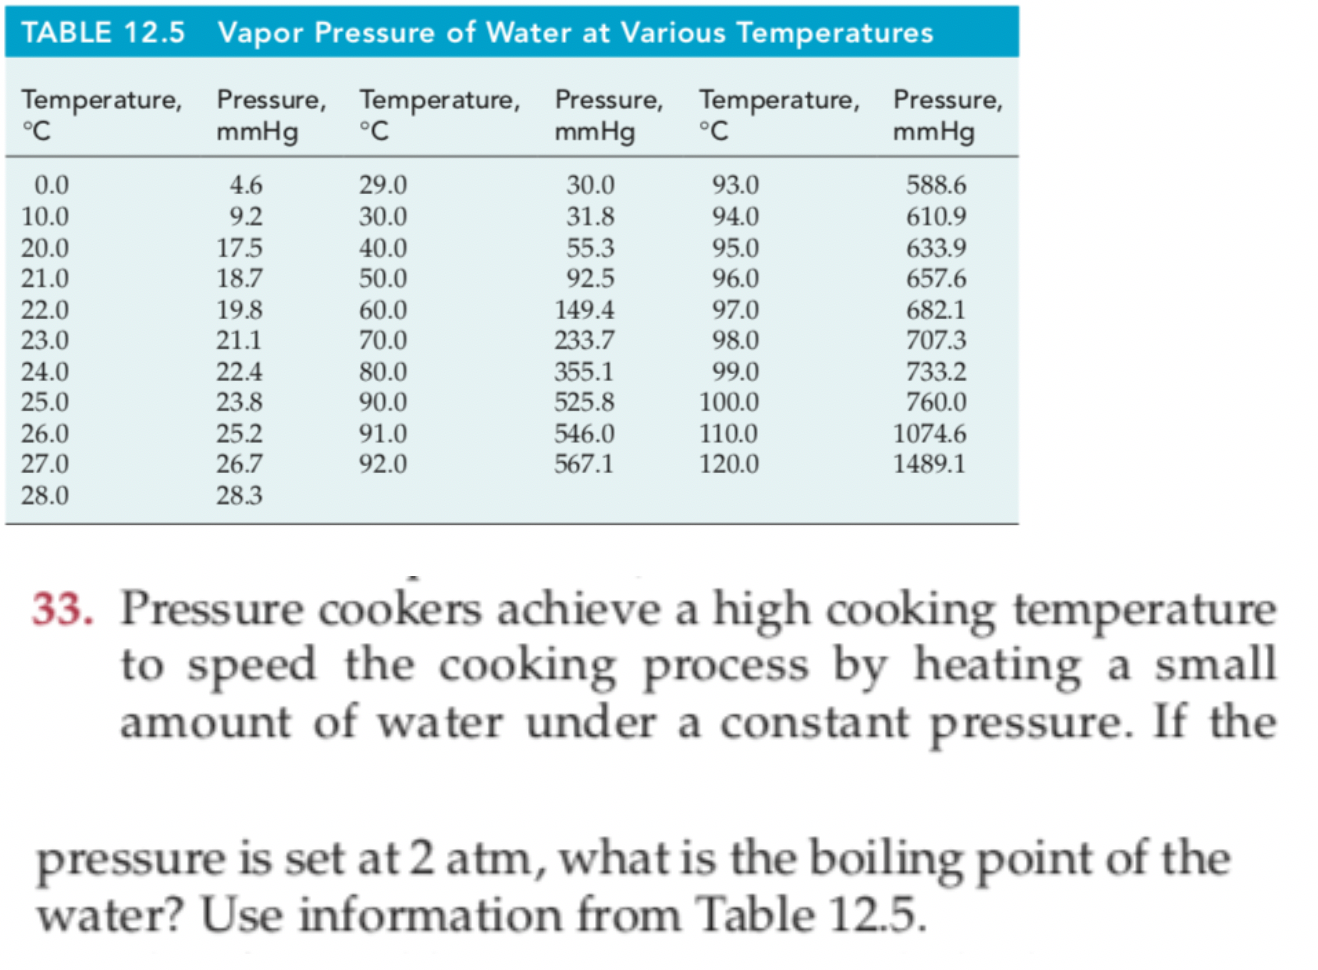 TABLE 12.5 Vapor Pressure of Water at Various Temperatures
Temperature, Pressure, Temperature, Pressure, Temperature, Pressure,
mmHg
°C
°C
mmHg
°C
mmHg
0.0
30.0
93.0
588.6
4.6
29.0
9.2
30.0
31.8
94.0
610.9
10.0
17.5
18.7
20.0
40.0
55.3
92.5
95.0
633.9
657.6
50.0
21.0
96.0
97.0
682.1
22.0
19.8
60.0
149.4
233.7
23.0
21.1
70.0
98.0
707.3
733.2
760.0
24.0
22.4
355.1
525.8
80.0
99.0
25.0
23.8
90.0
100.0
110.0
91.0
546.0
567.1
1074.6
1489.1
26.0
27.0
25.2
26.7
92.0
120.0
28.0
28.3
33. Pressure cookers achieve a high cooking temperature
to speed the cooking process by heating a small
amount of water under a constant pressure. If the
pressure is set at 2 atm, what is the boiling point of the
water? Use information from Table 12.5.
